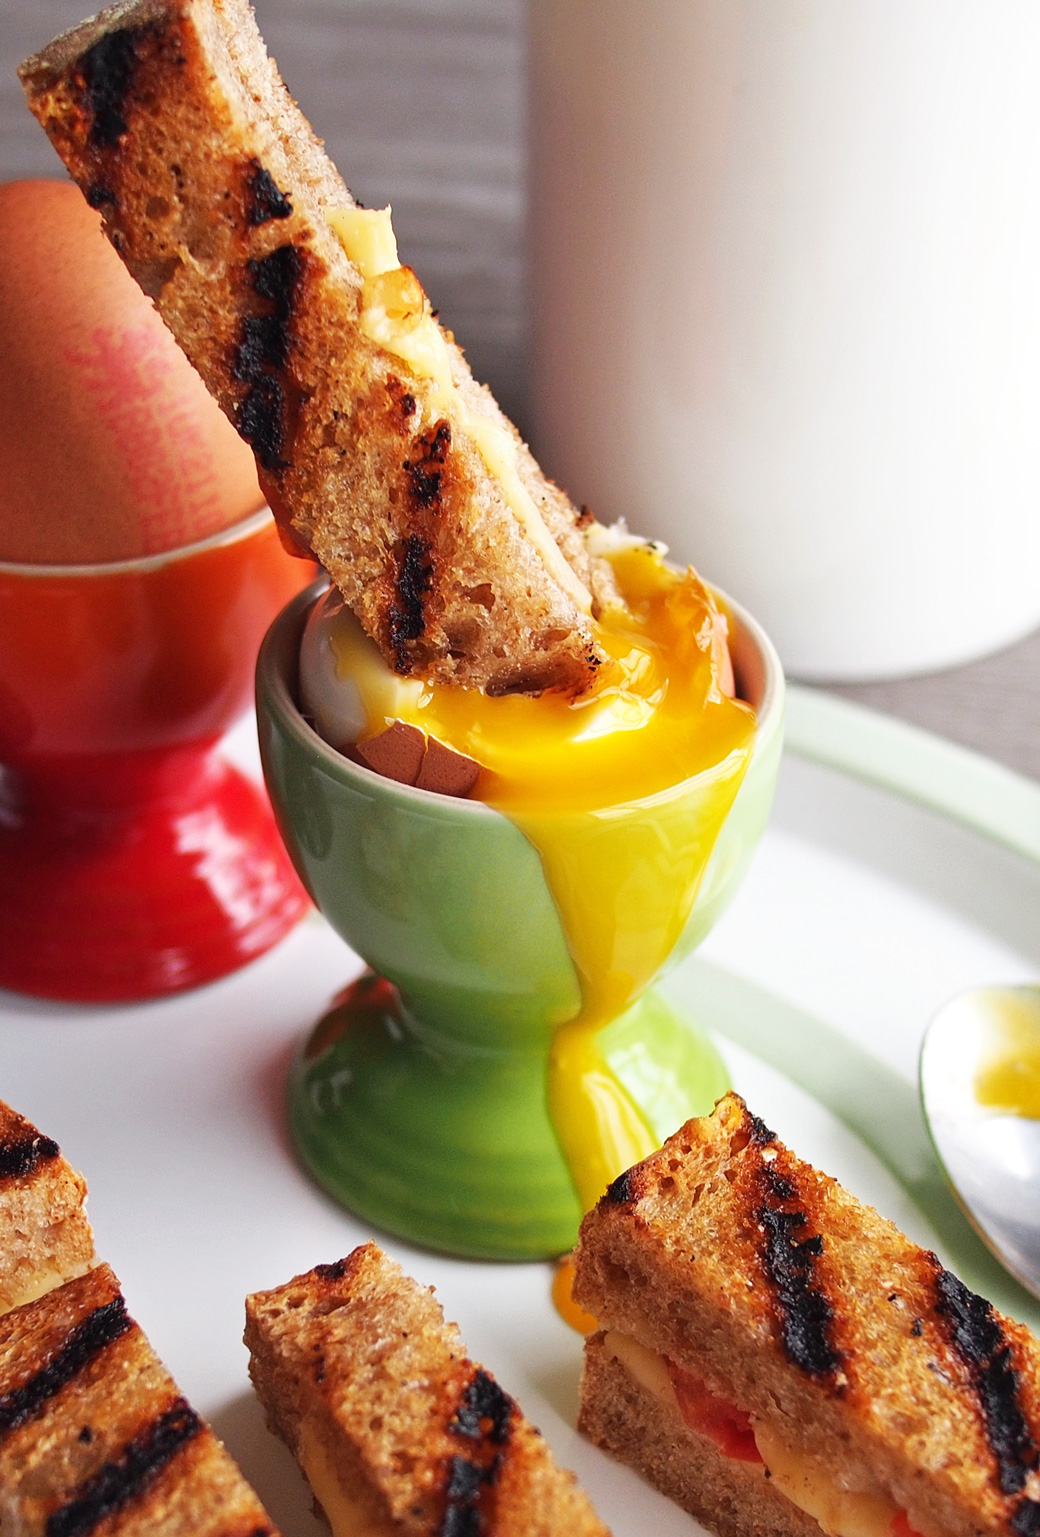 Dippy Eggs and Grilled Cheese Soldiers